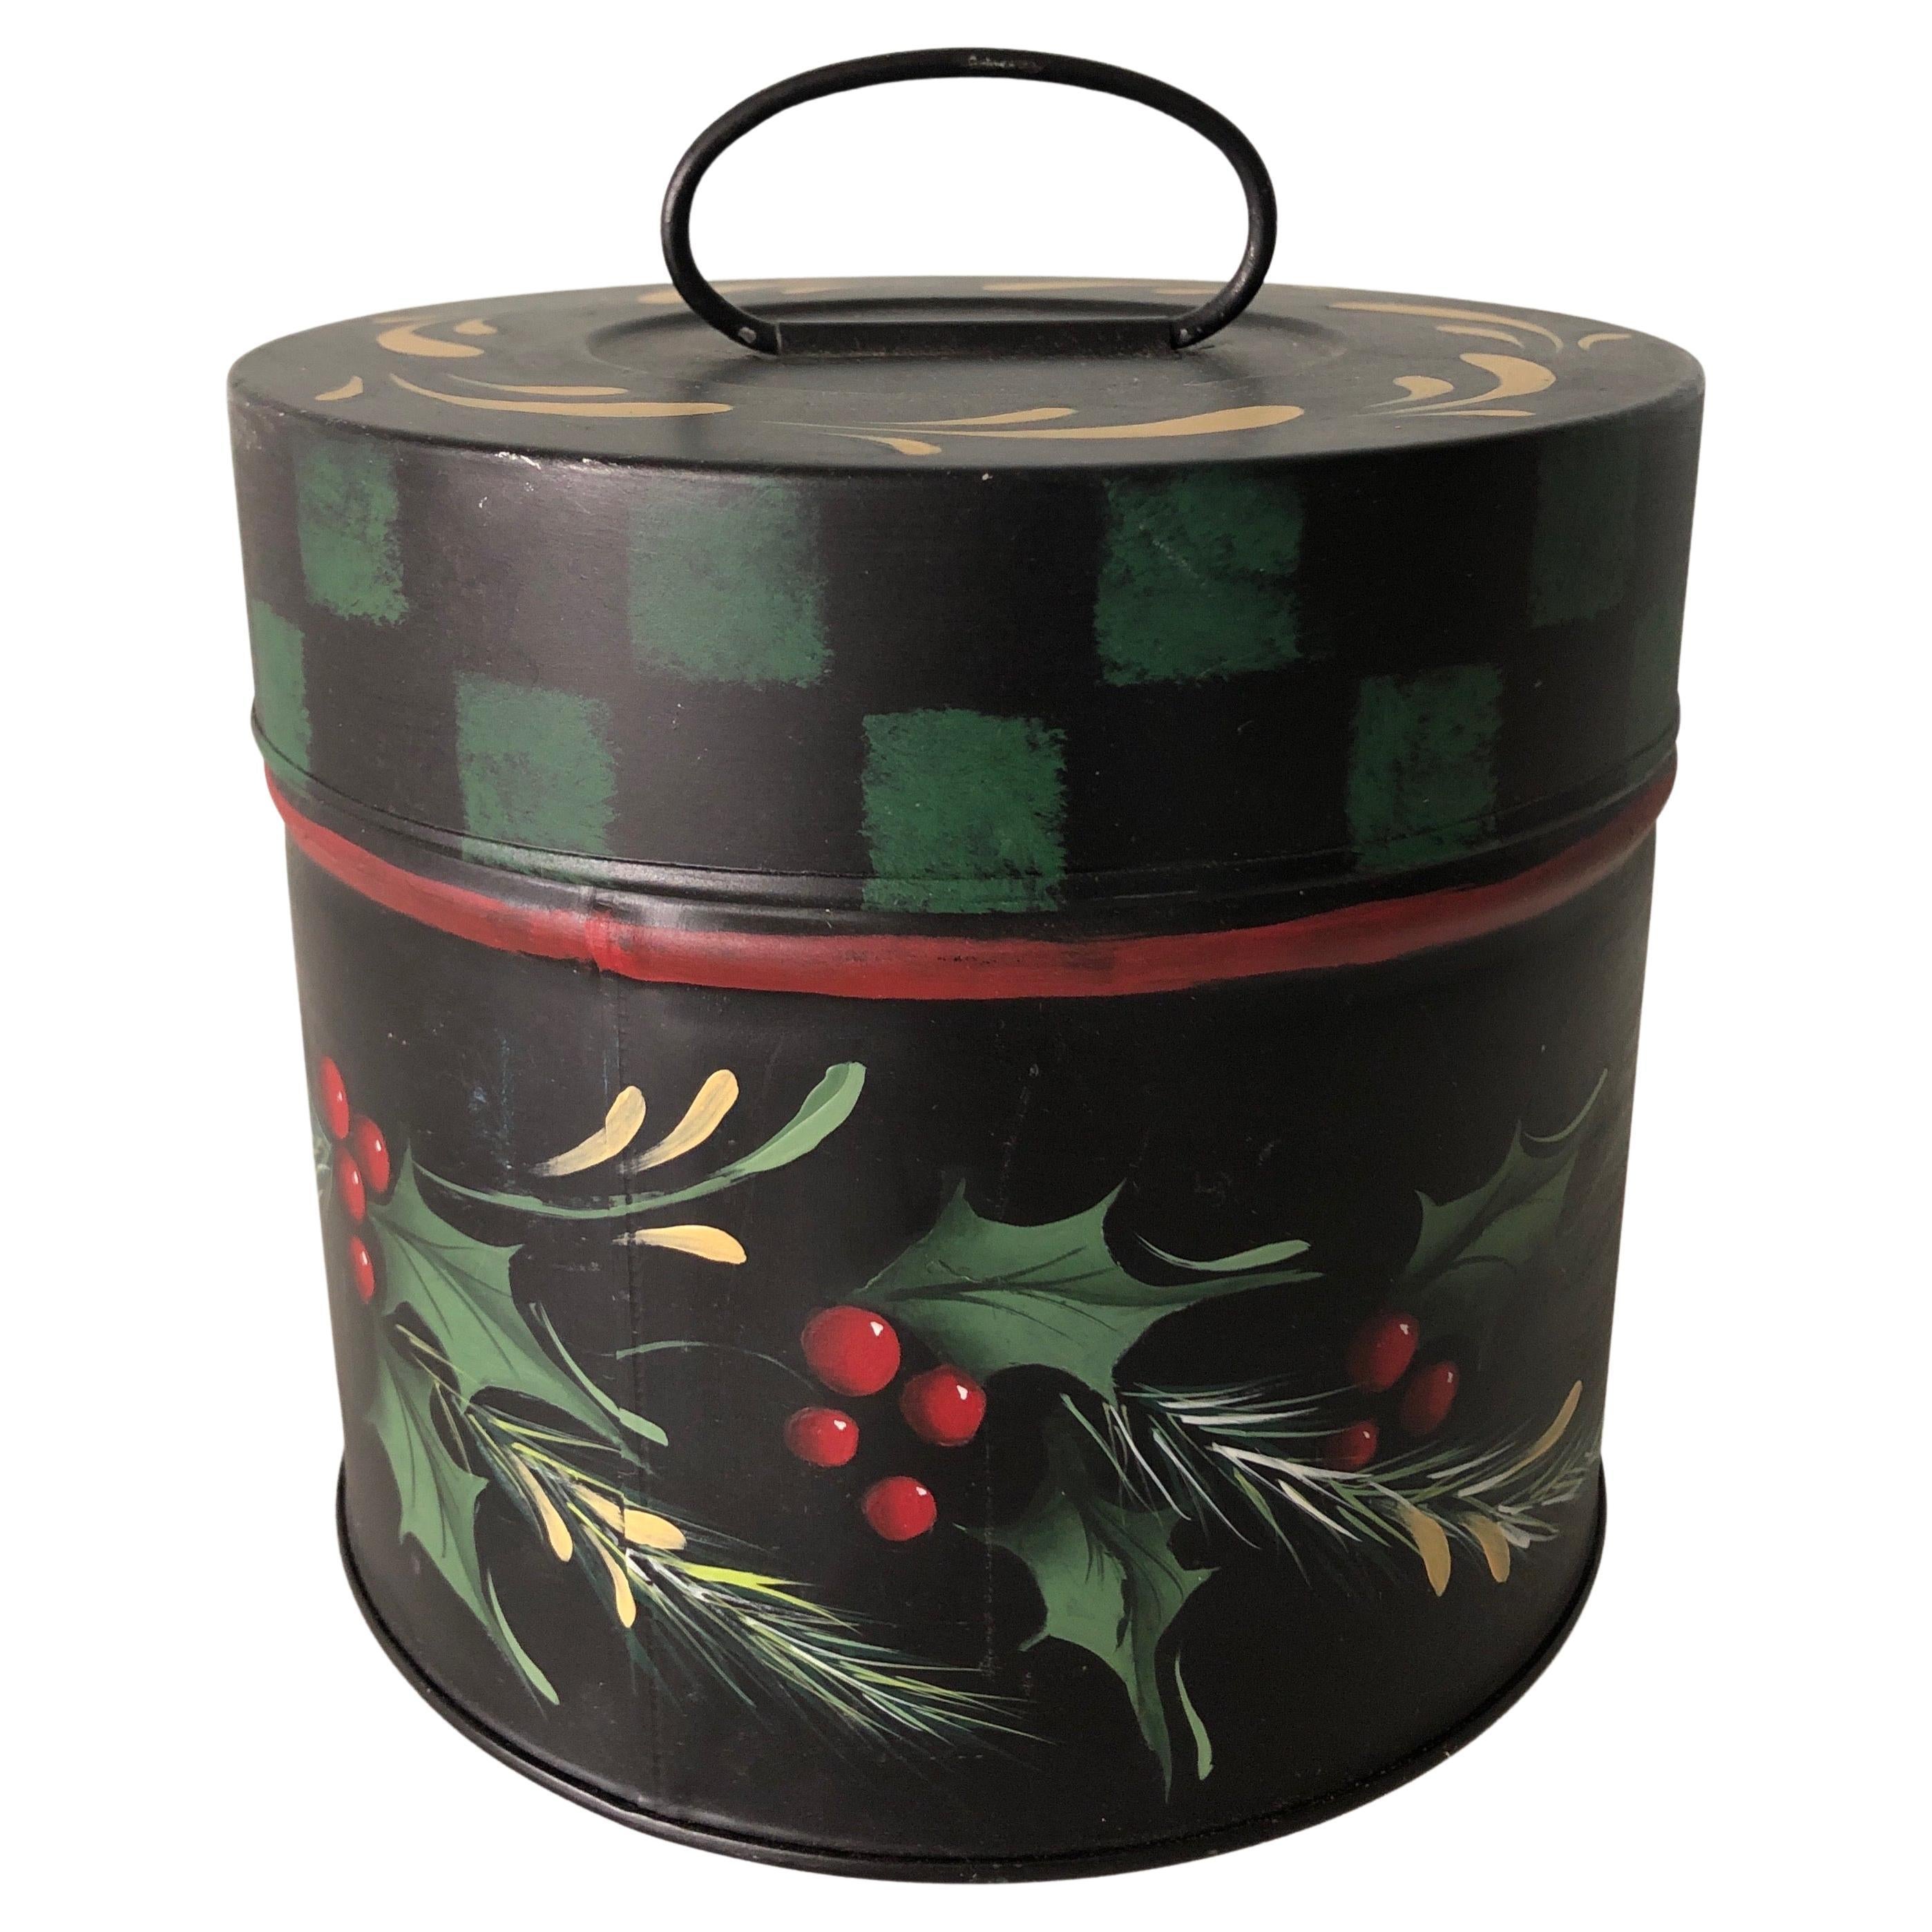 Vintage Round Tole Hand Painted Canister with Holiday Theme Hand Painted Details